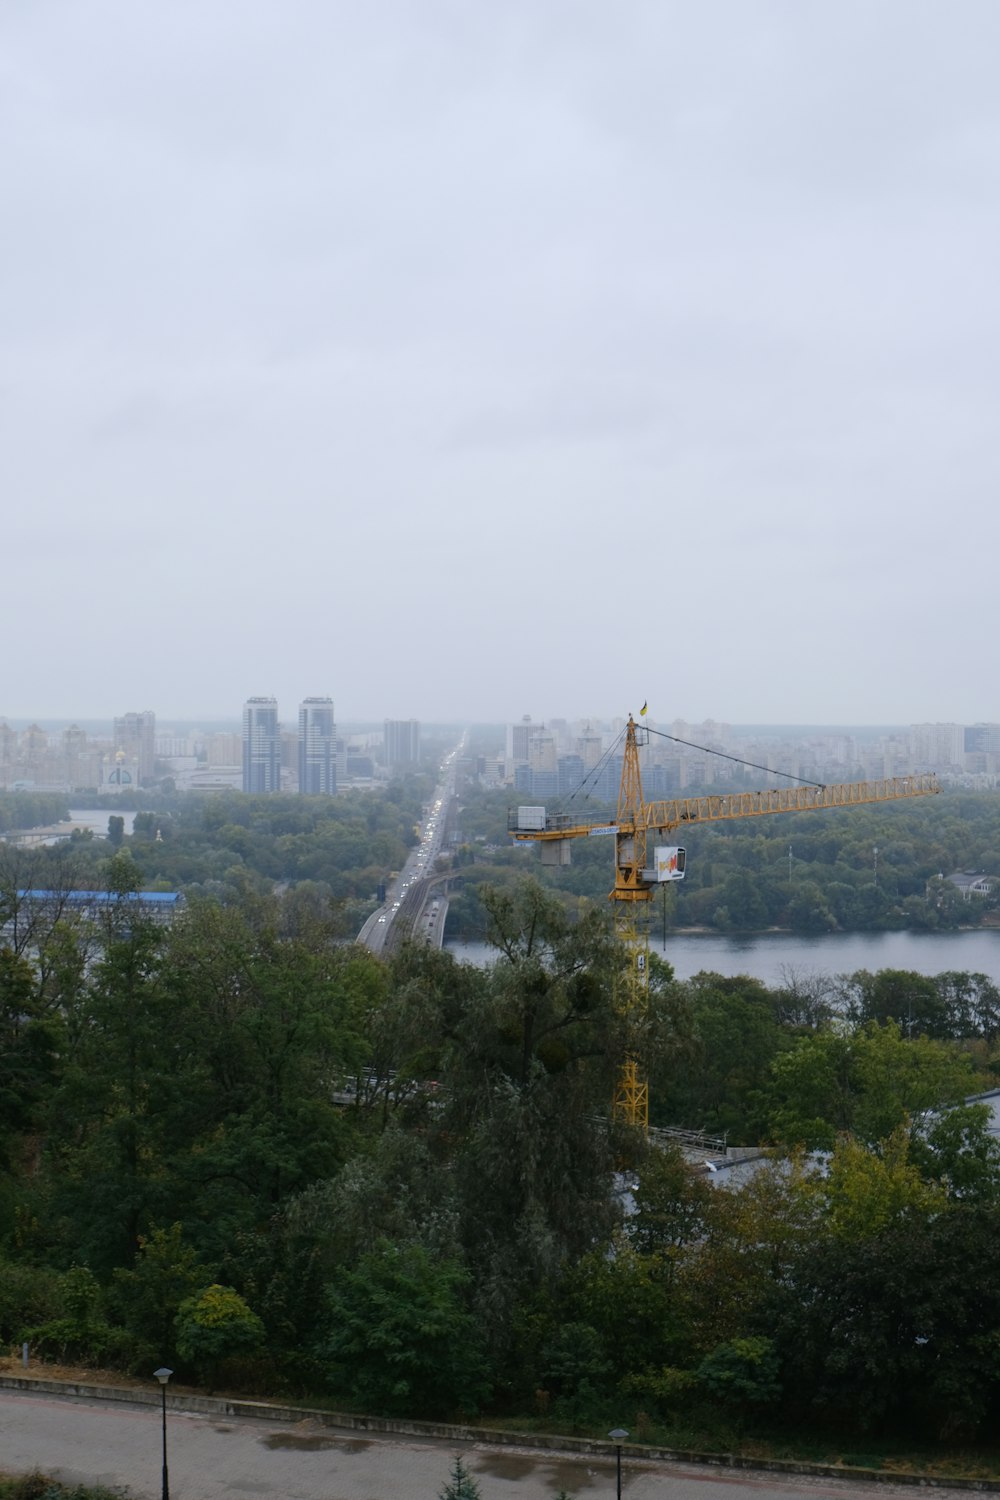 a view of a city with a crane in the foreground